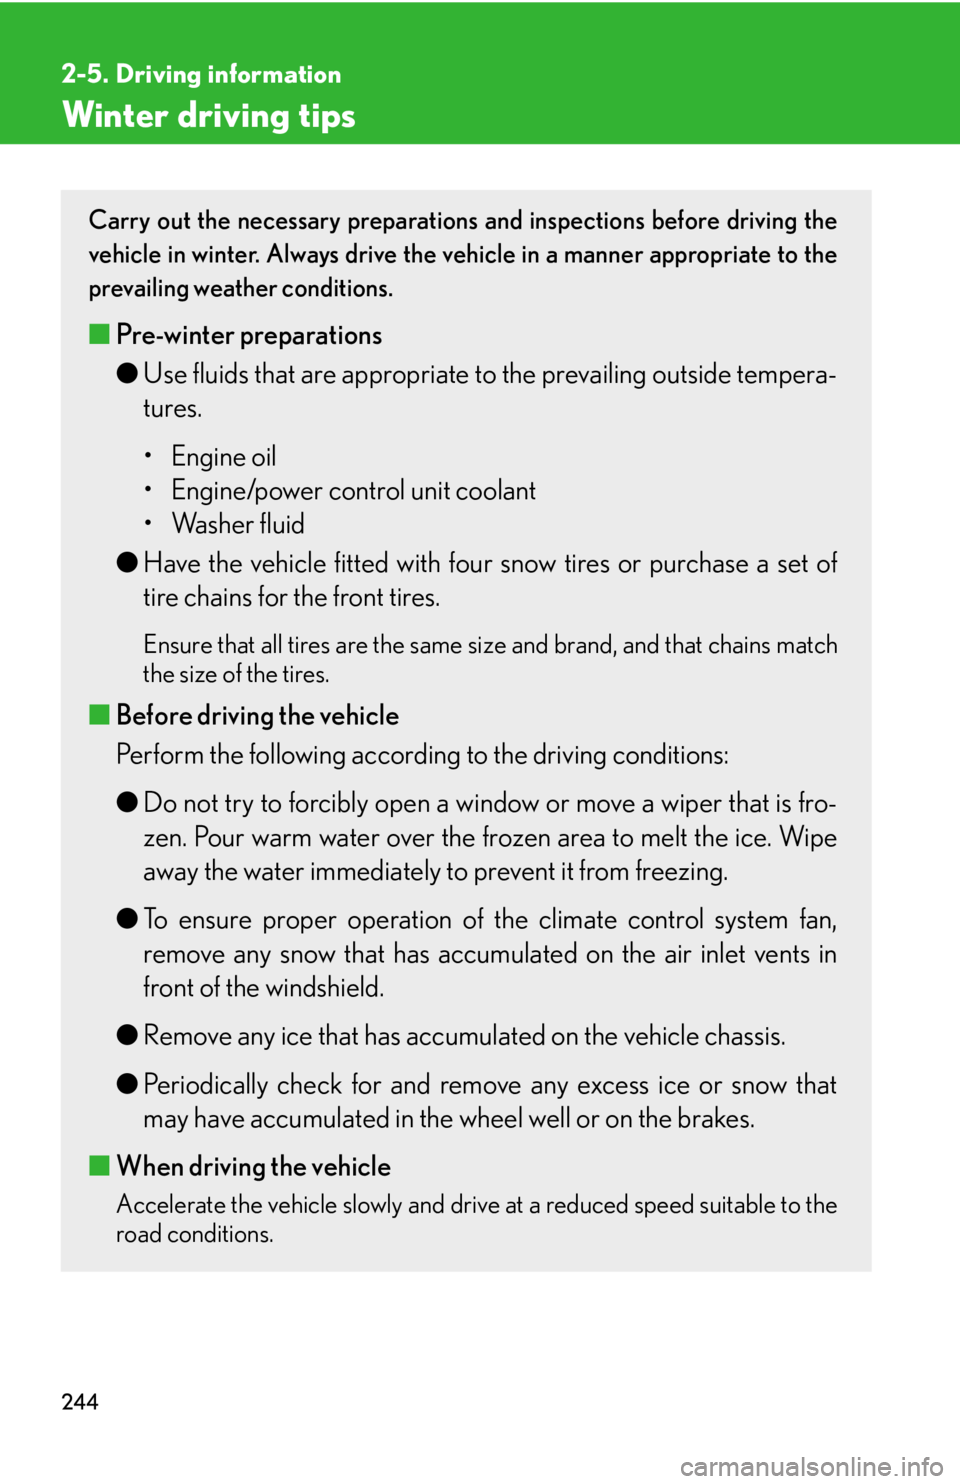 Lexus HS250h 2010  Basic Information Before Operation / LEXUS 2010 HS250H OWNERS MANUAL (OM75006U) 244
2-5. Driving information
Winter driving tips
Carry out the necessary preparations and inspections before driving the 
vehicle in winter. Always drive the vehicle in a manner appropriate to the 
pr